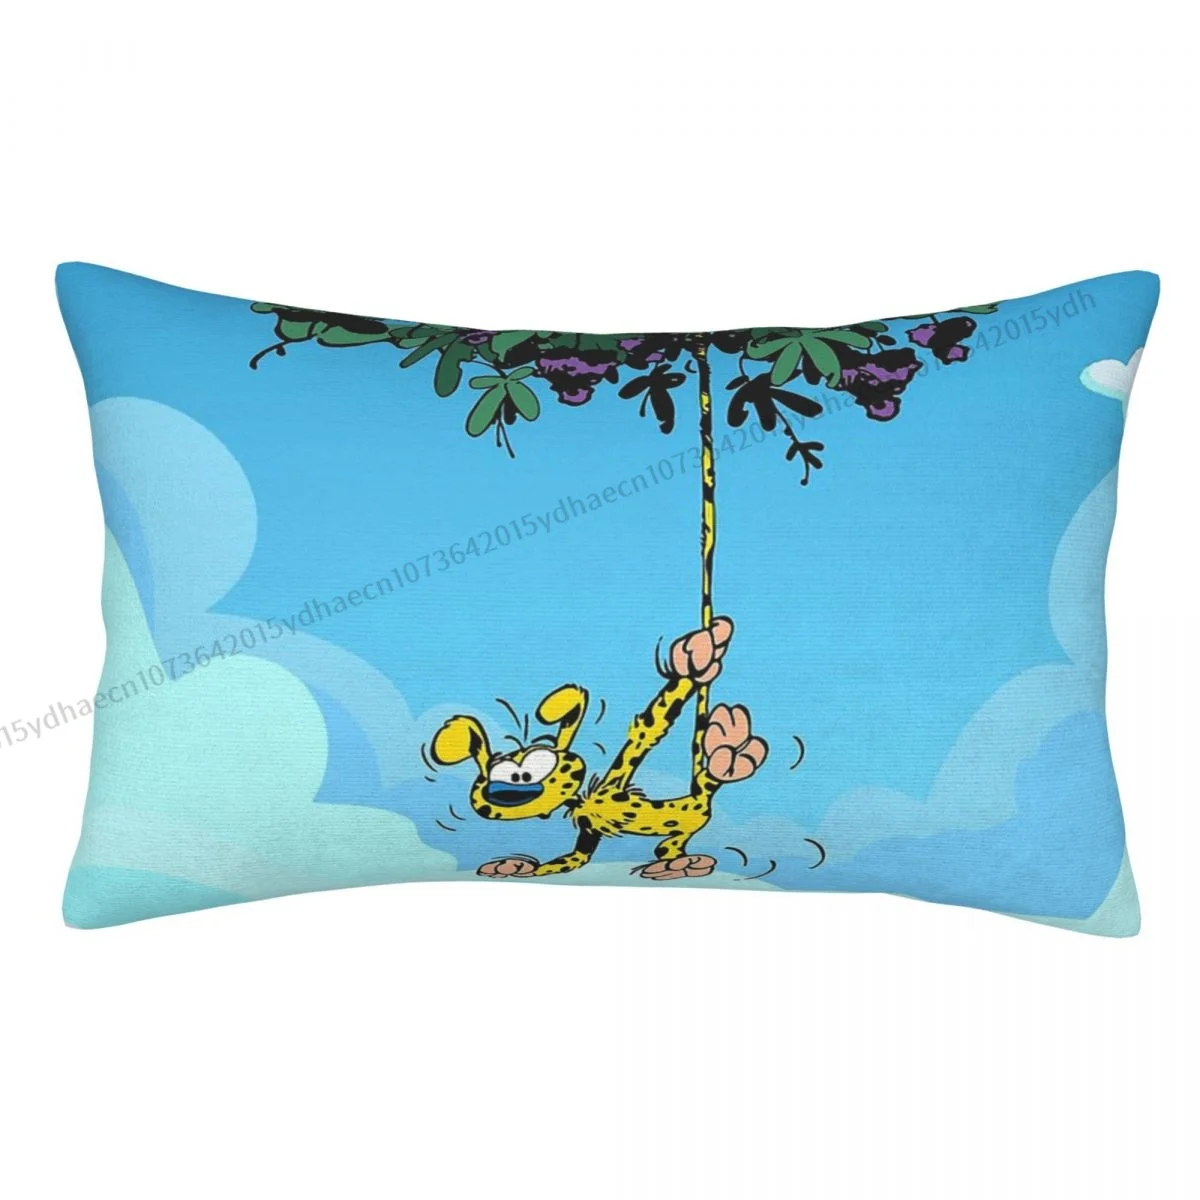 

Hanging On Tail In The Sky Cojines Pillowcase Marsupilami Cute Leopard Cushion Sofa Chair Print Decorative Coussin Pillow Covers